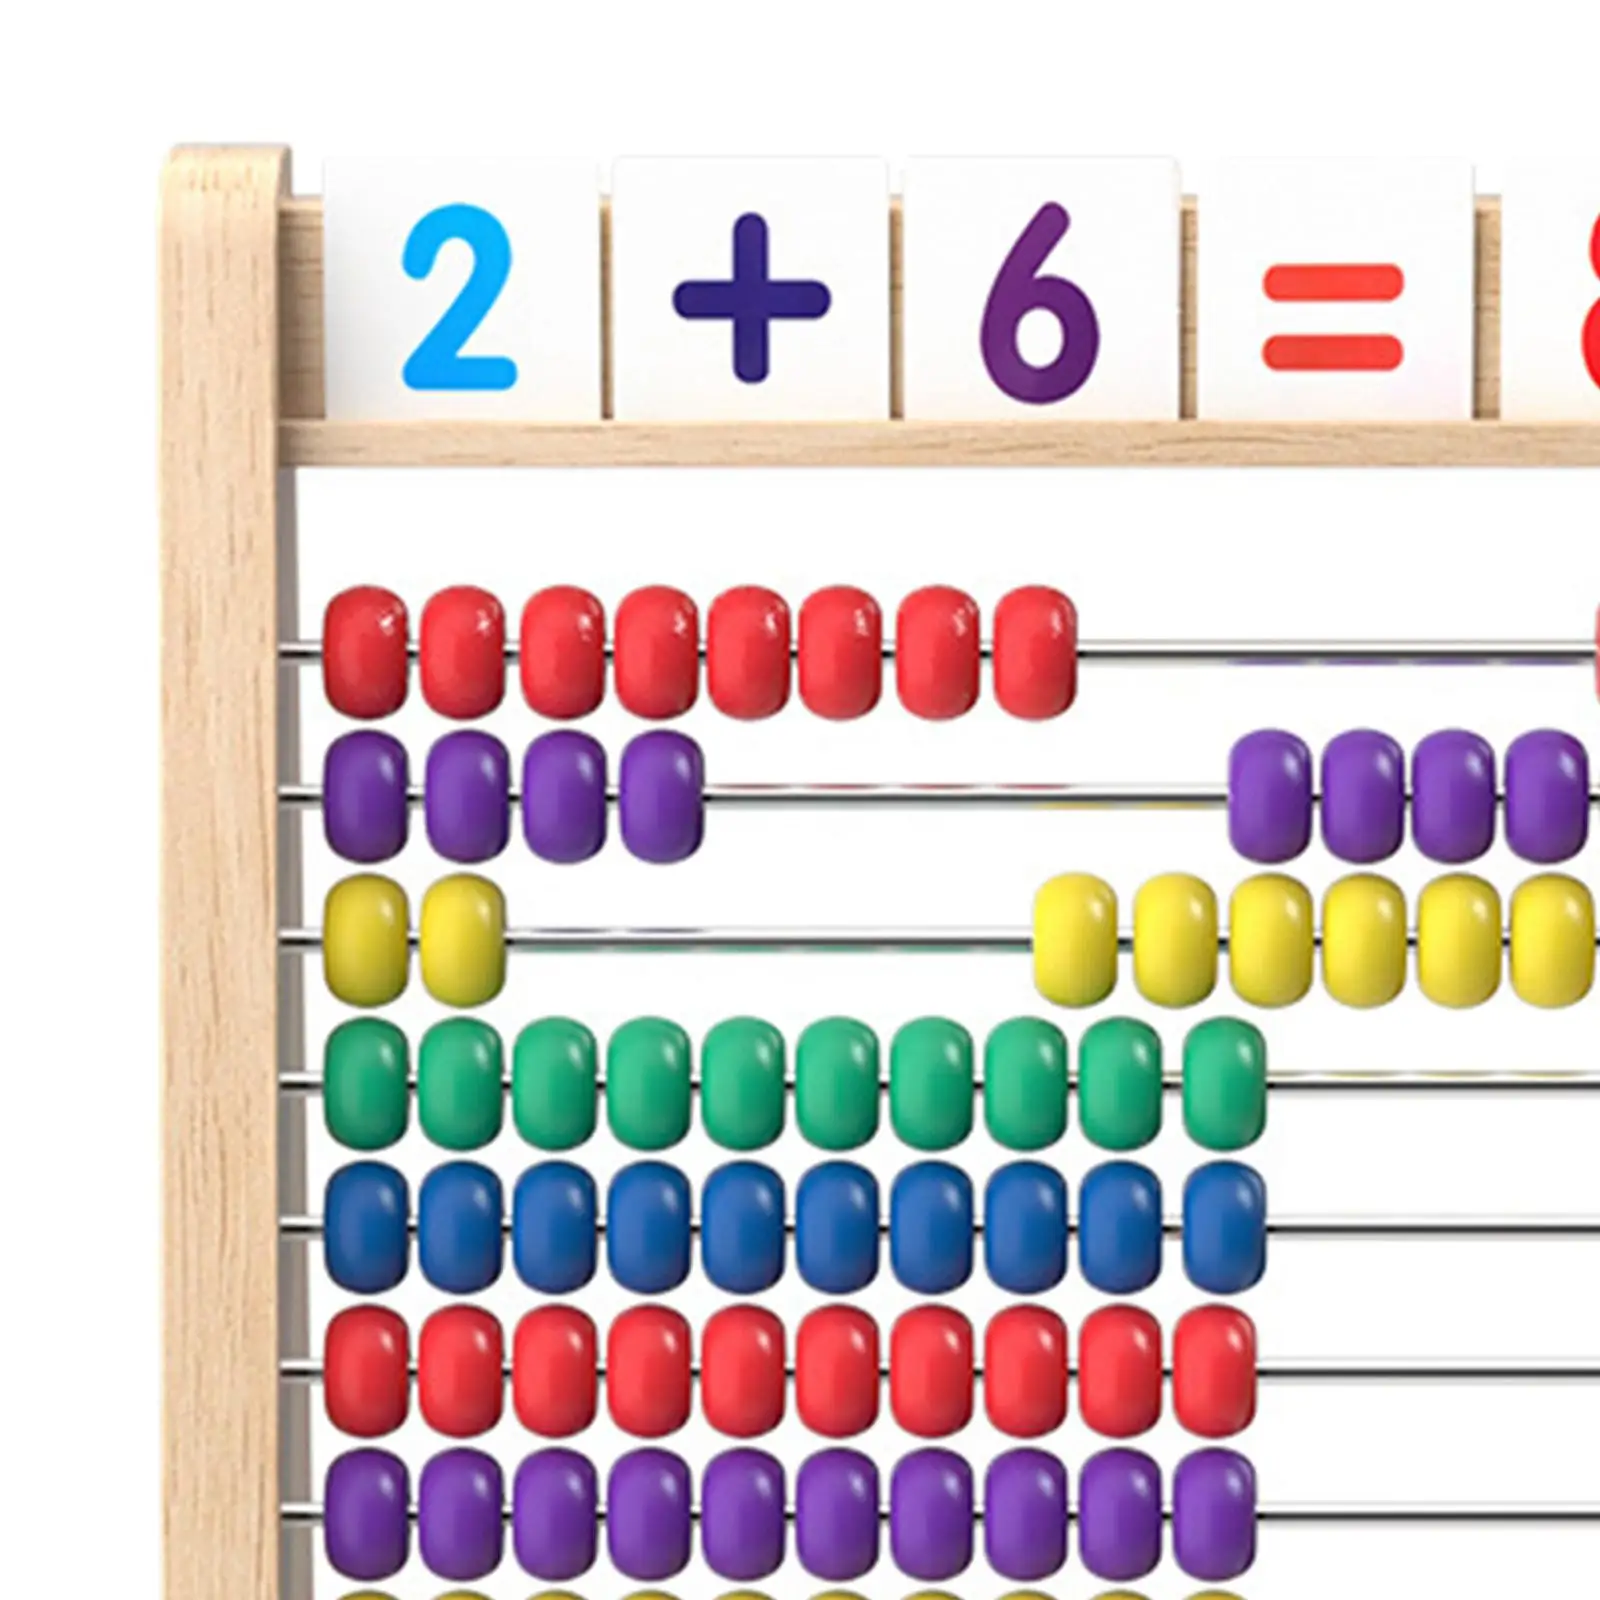 Wooden Abacus Wooden Educational Counting Toy for Activity Toys Preschool Learning Early Childhood Education Early Development